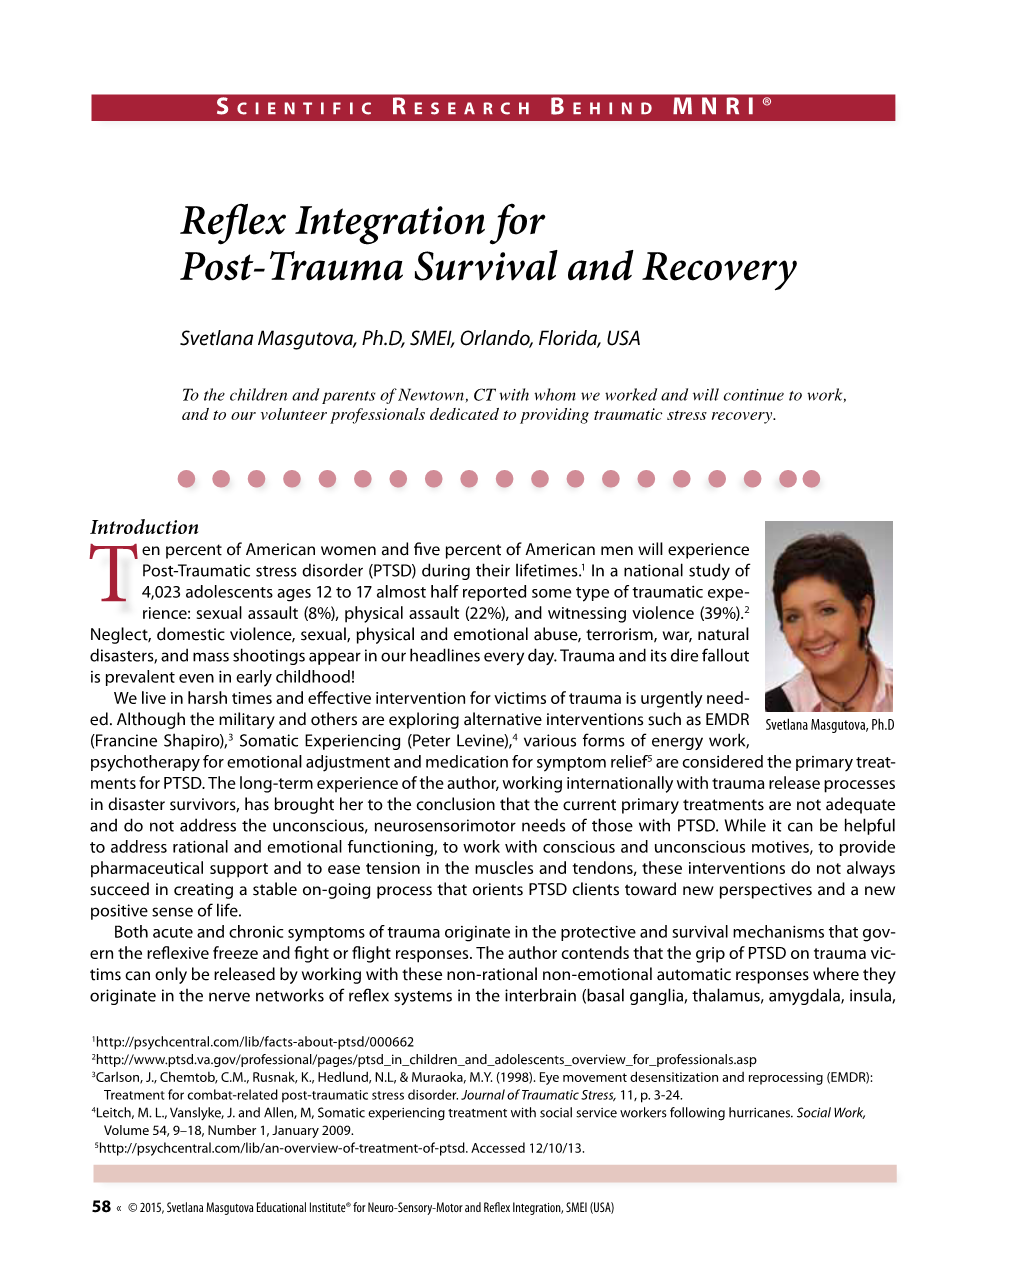 Reflex Integration for Post-Trauma Survival and Recovery